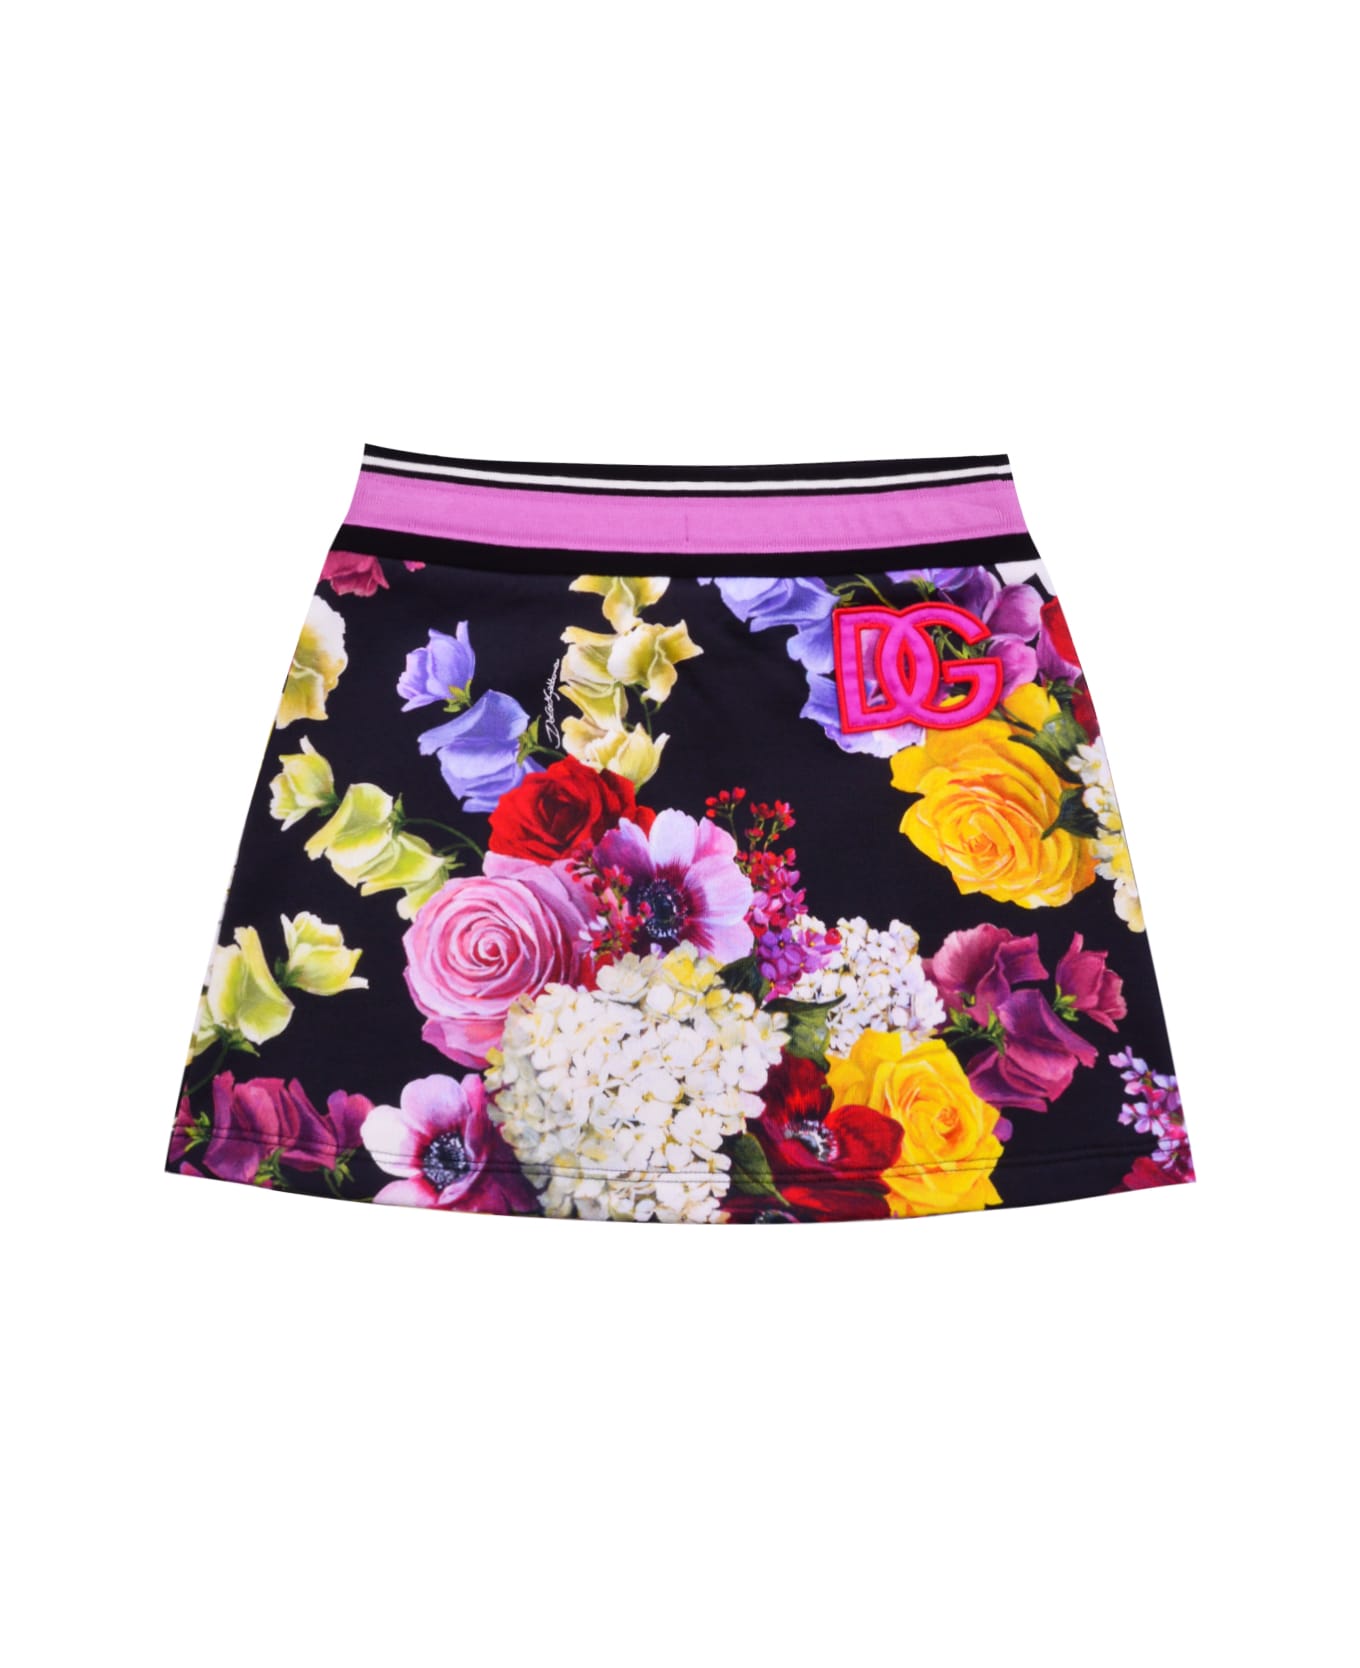 Dolce & Gabbana Cotton Skirt With Flower Print - Multicolor